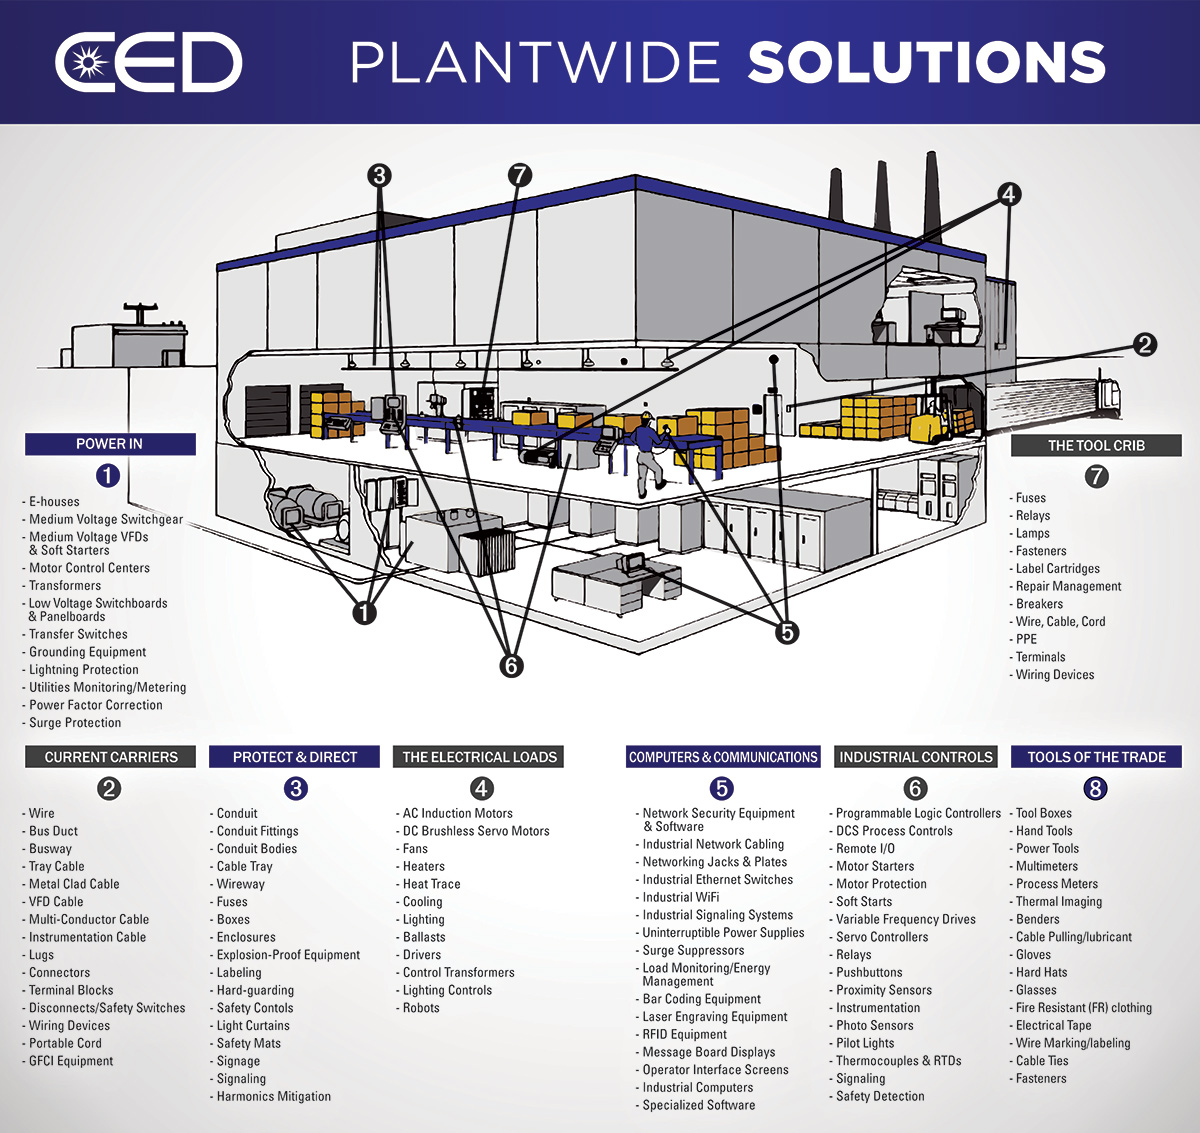 CED Industry